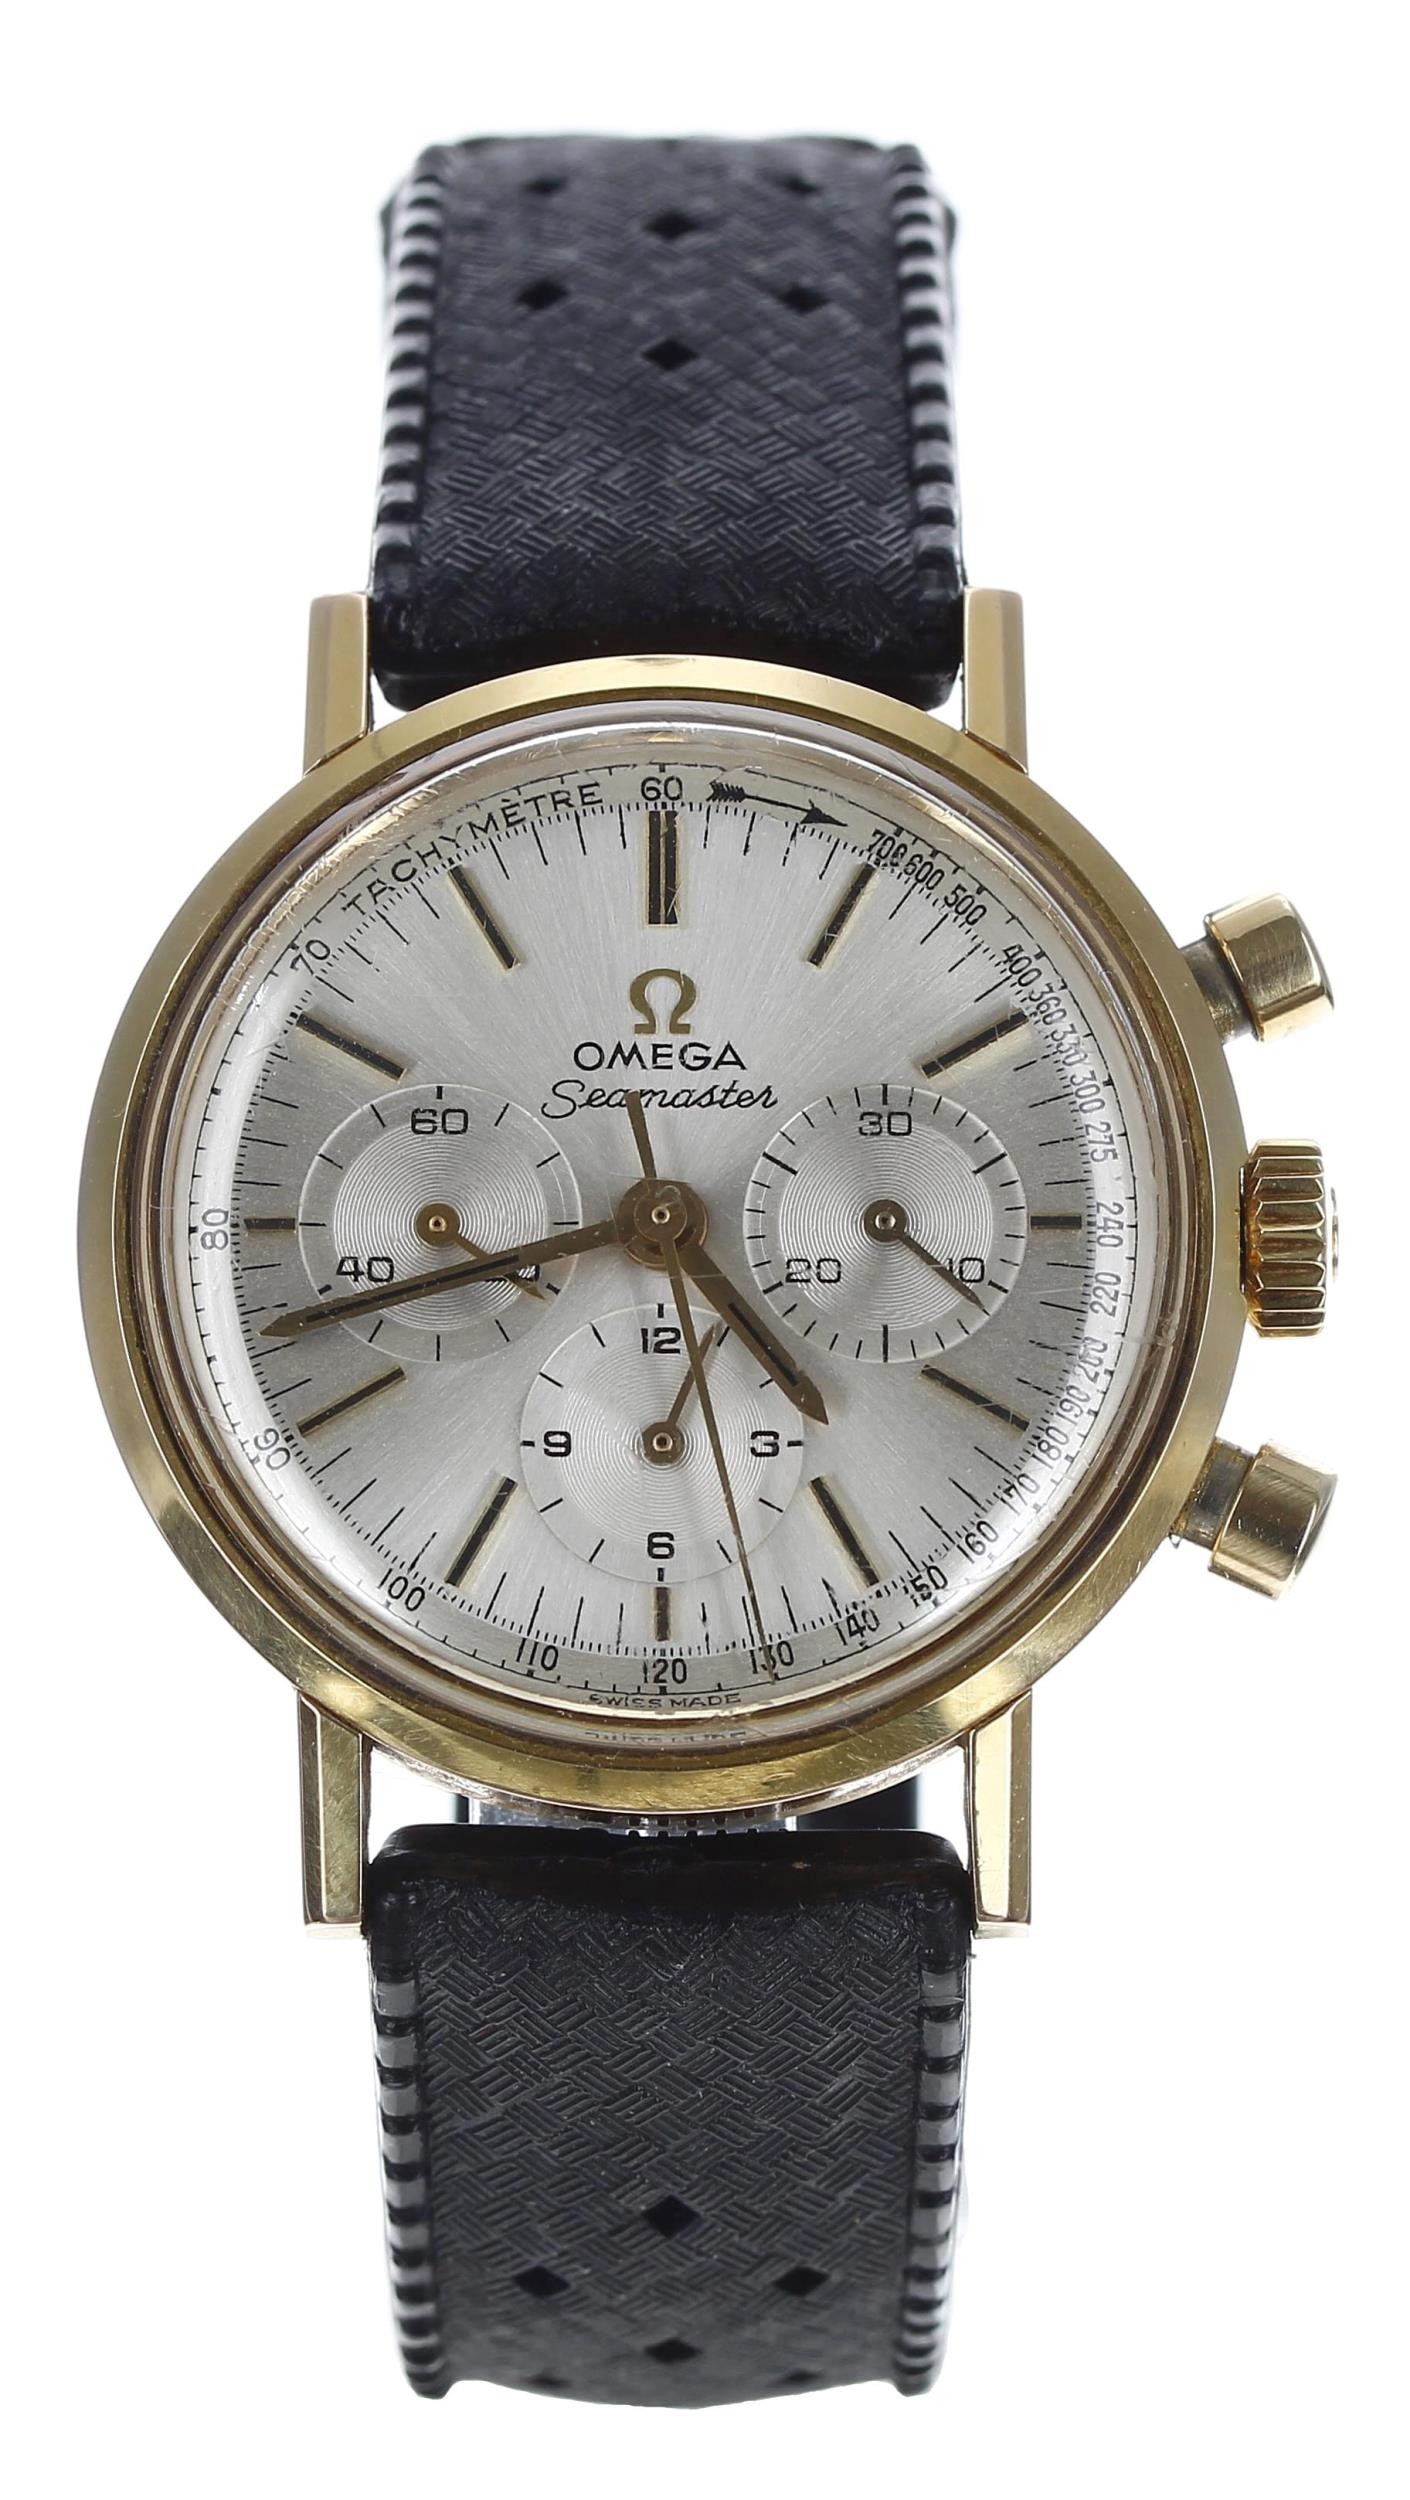 Omega Seamaster Chronograph gold plated and stainless steel gentleman's wristwatch, reference no. - Image 2 of 7